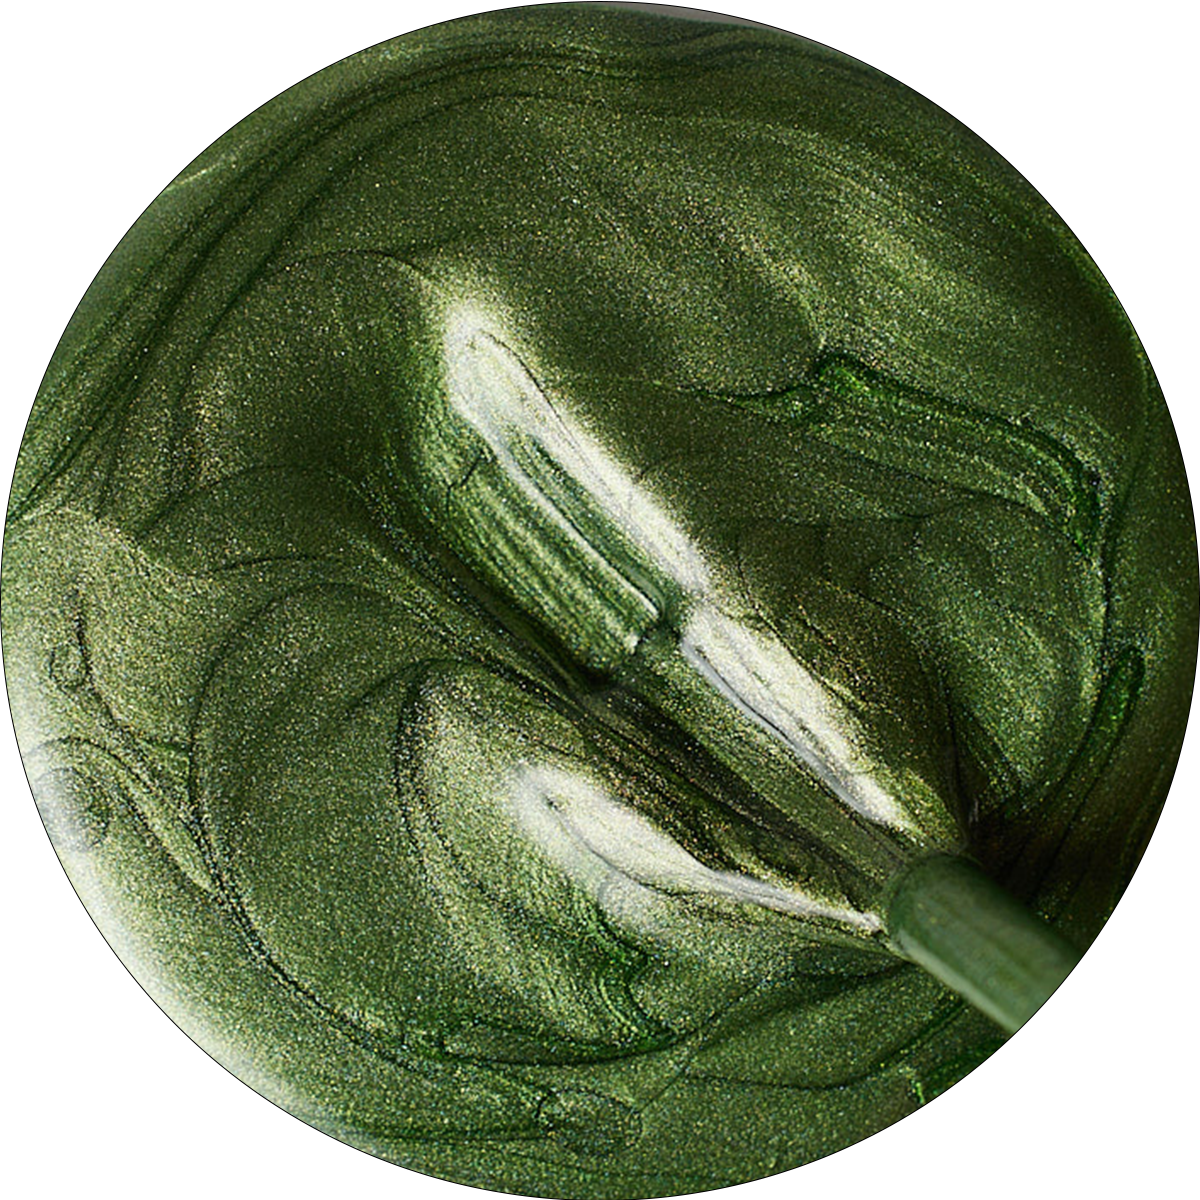 paint swatch of green shimmer nail polish